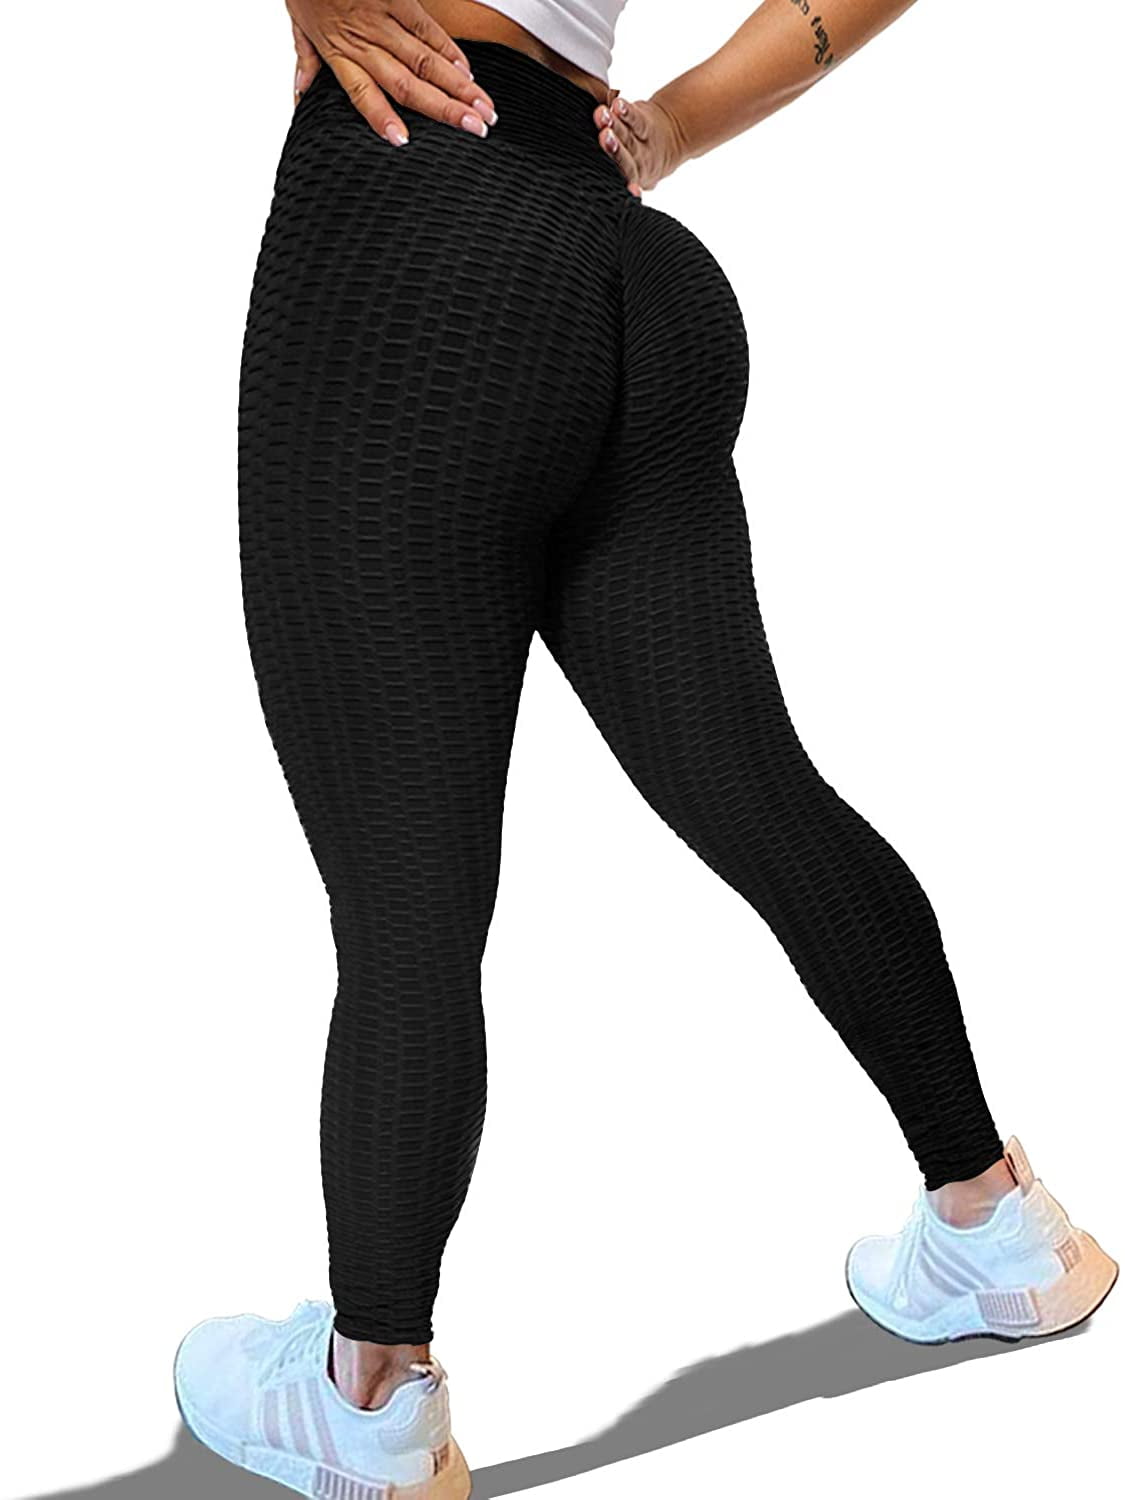 FITTOO Women’s High Waisted Butt Lifting Seamless Leggings Gym Fitness Tights Tummy Control Workout Yoga Pants 